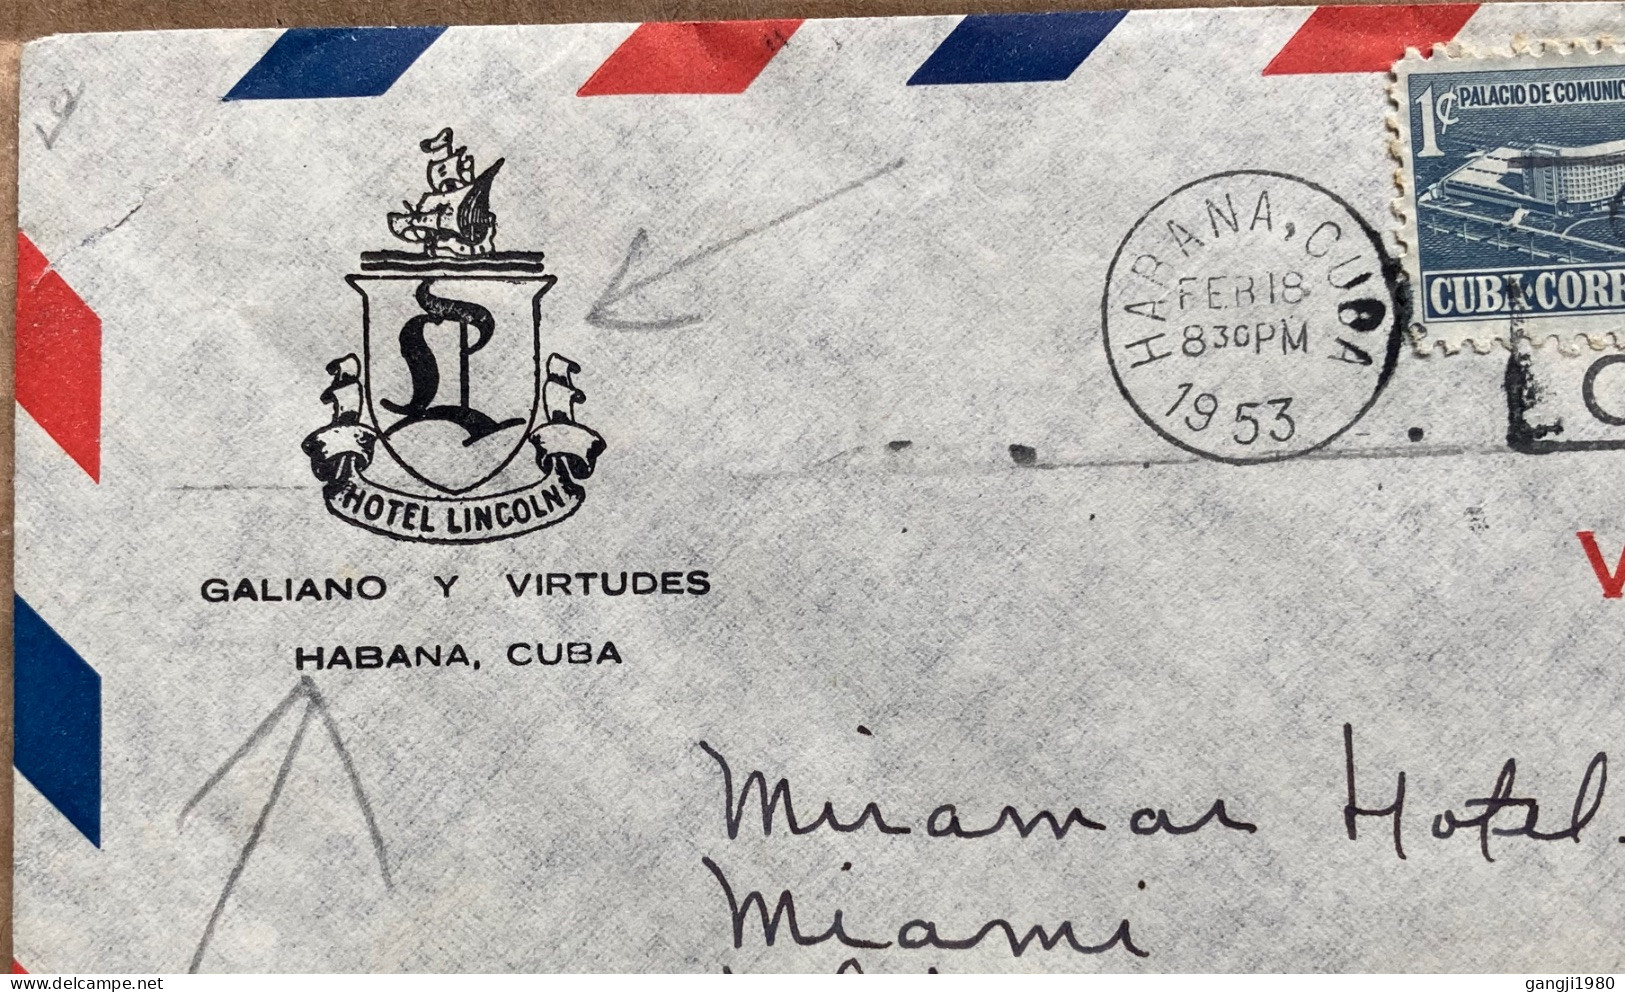 CUBA 1953, ILLUSTRATE COVER, HOTEL LINCOLN, USED TO USA, COOPERATE FOR CENSUS, MACHINE SLOGAN, BUILDING, AIR PLANE, HABA - Covers & Documents